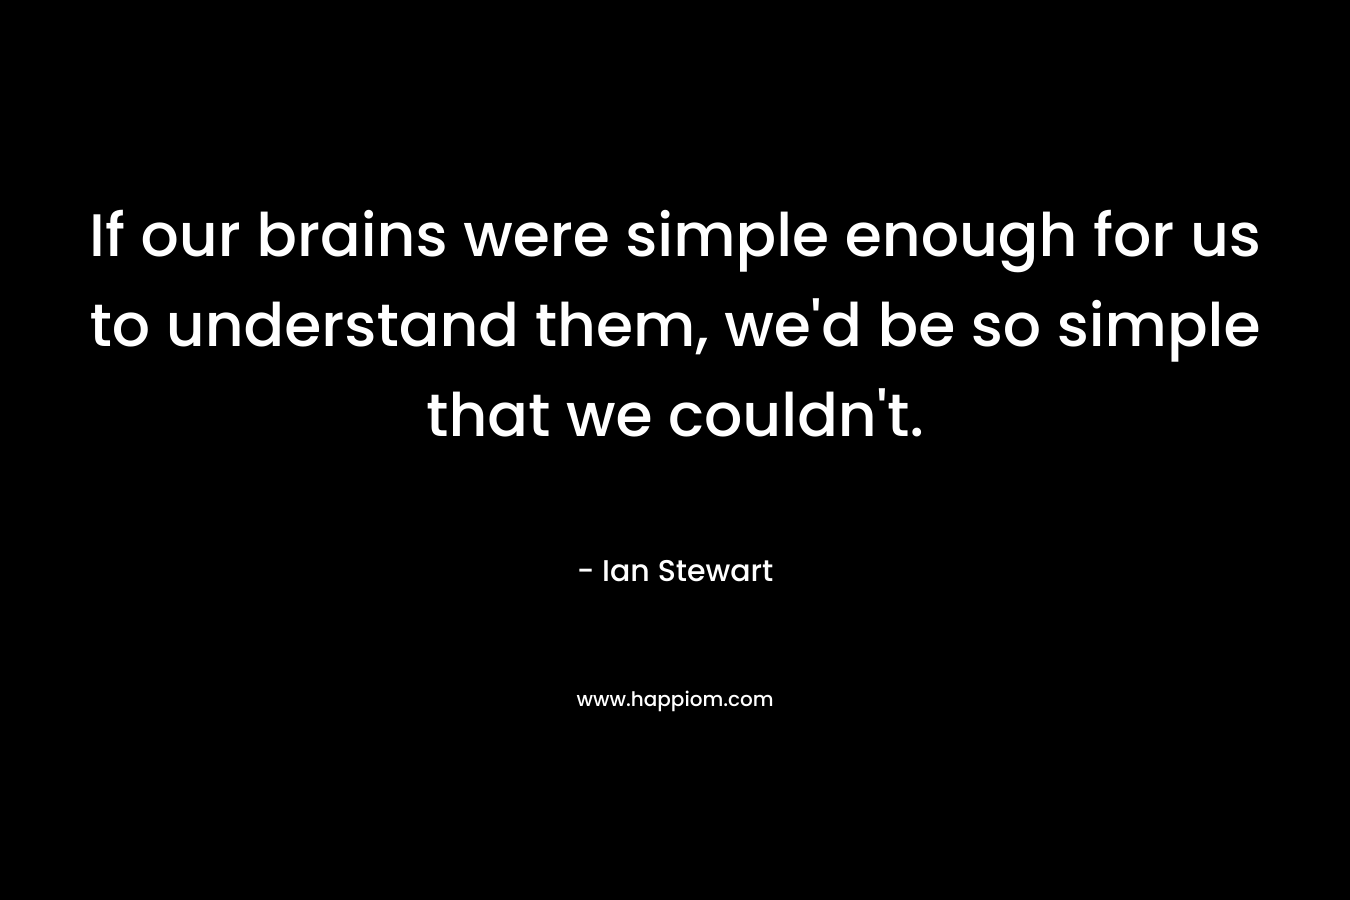 If our brains were simple enough for us to understand them, we'd be so simple that we couldn't.